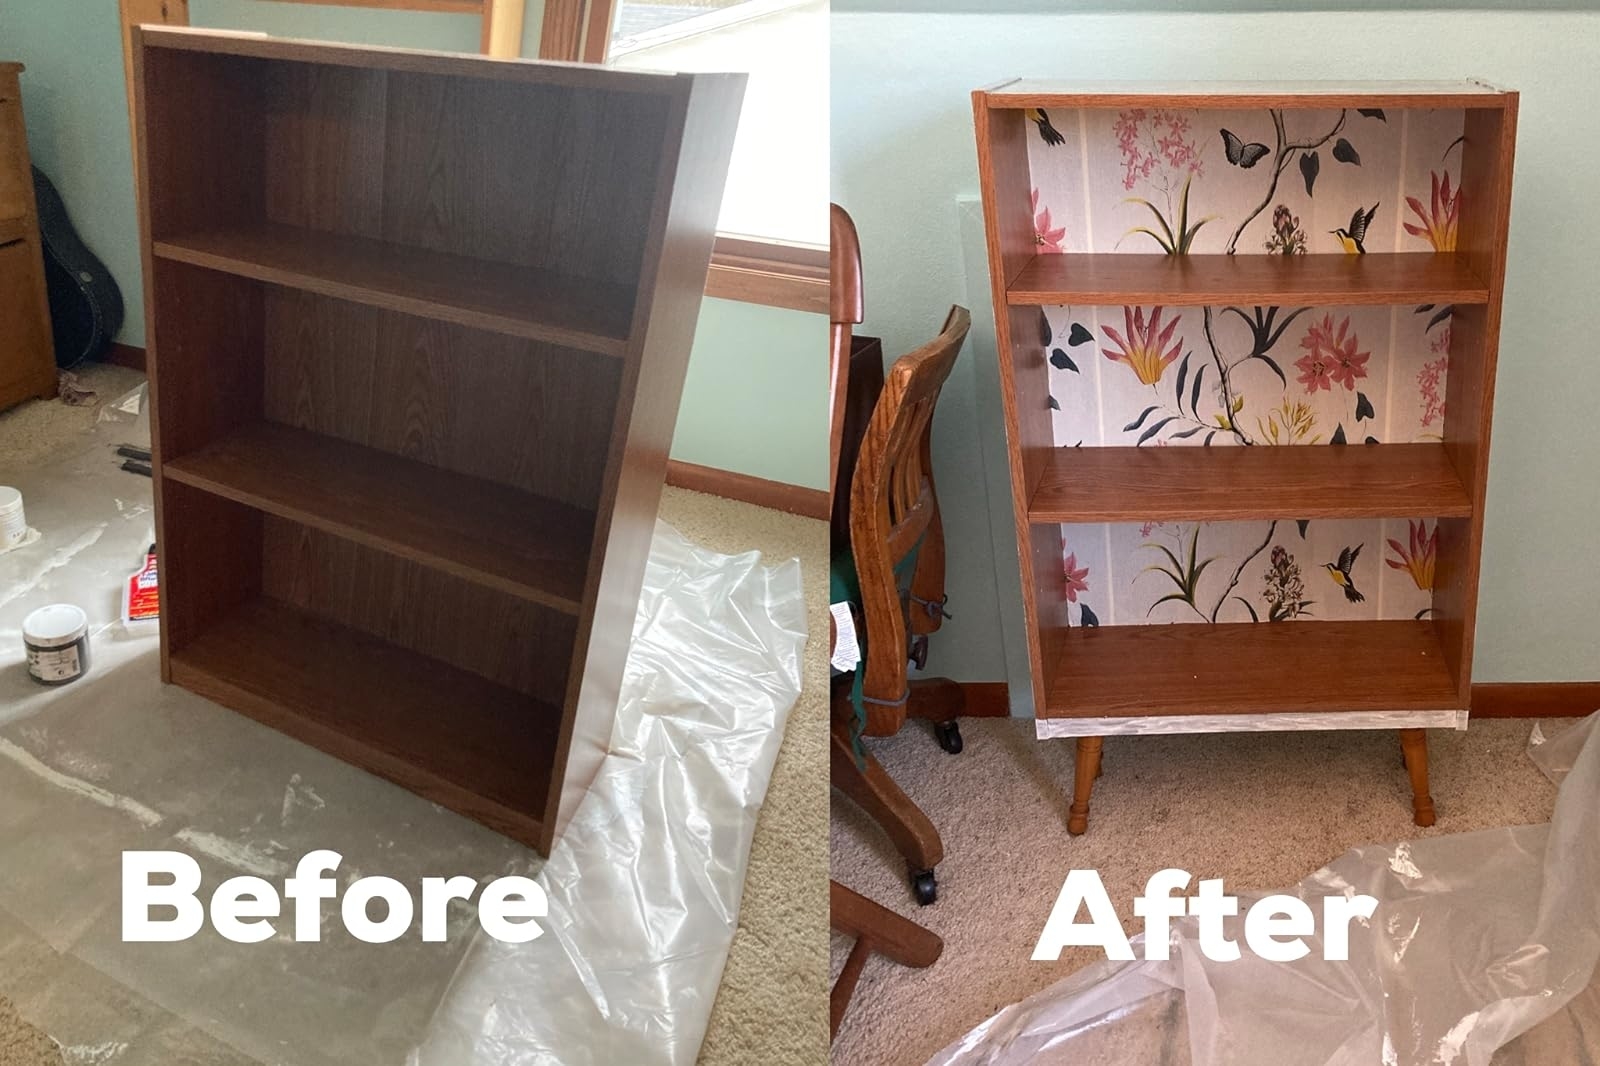 Before and After photos of a bookshelf upcycled with floral design, demonstrating a DIY project idea.